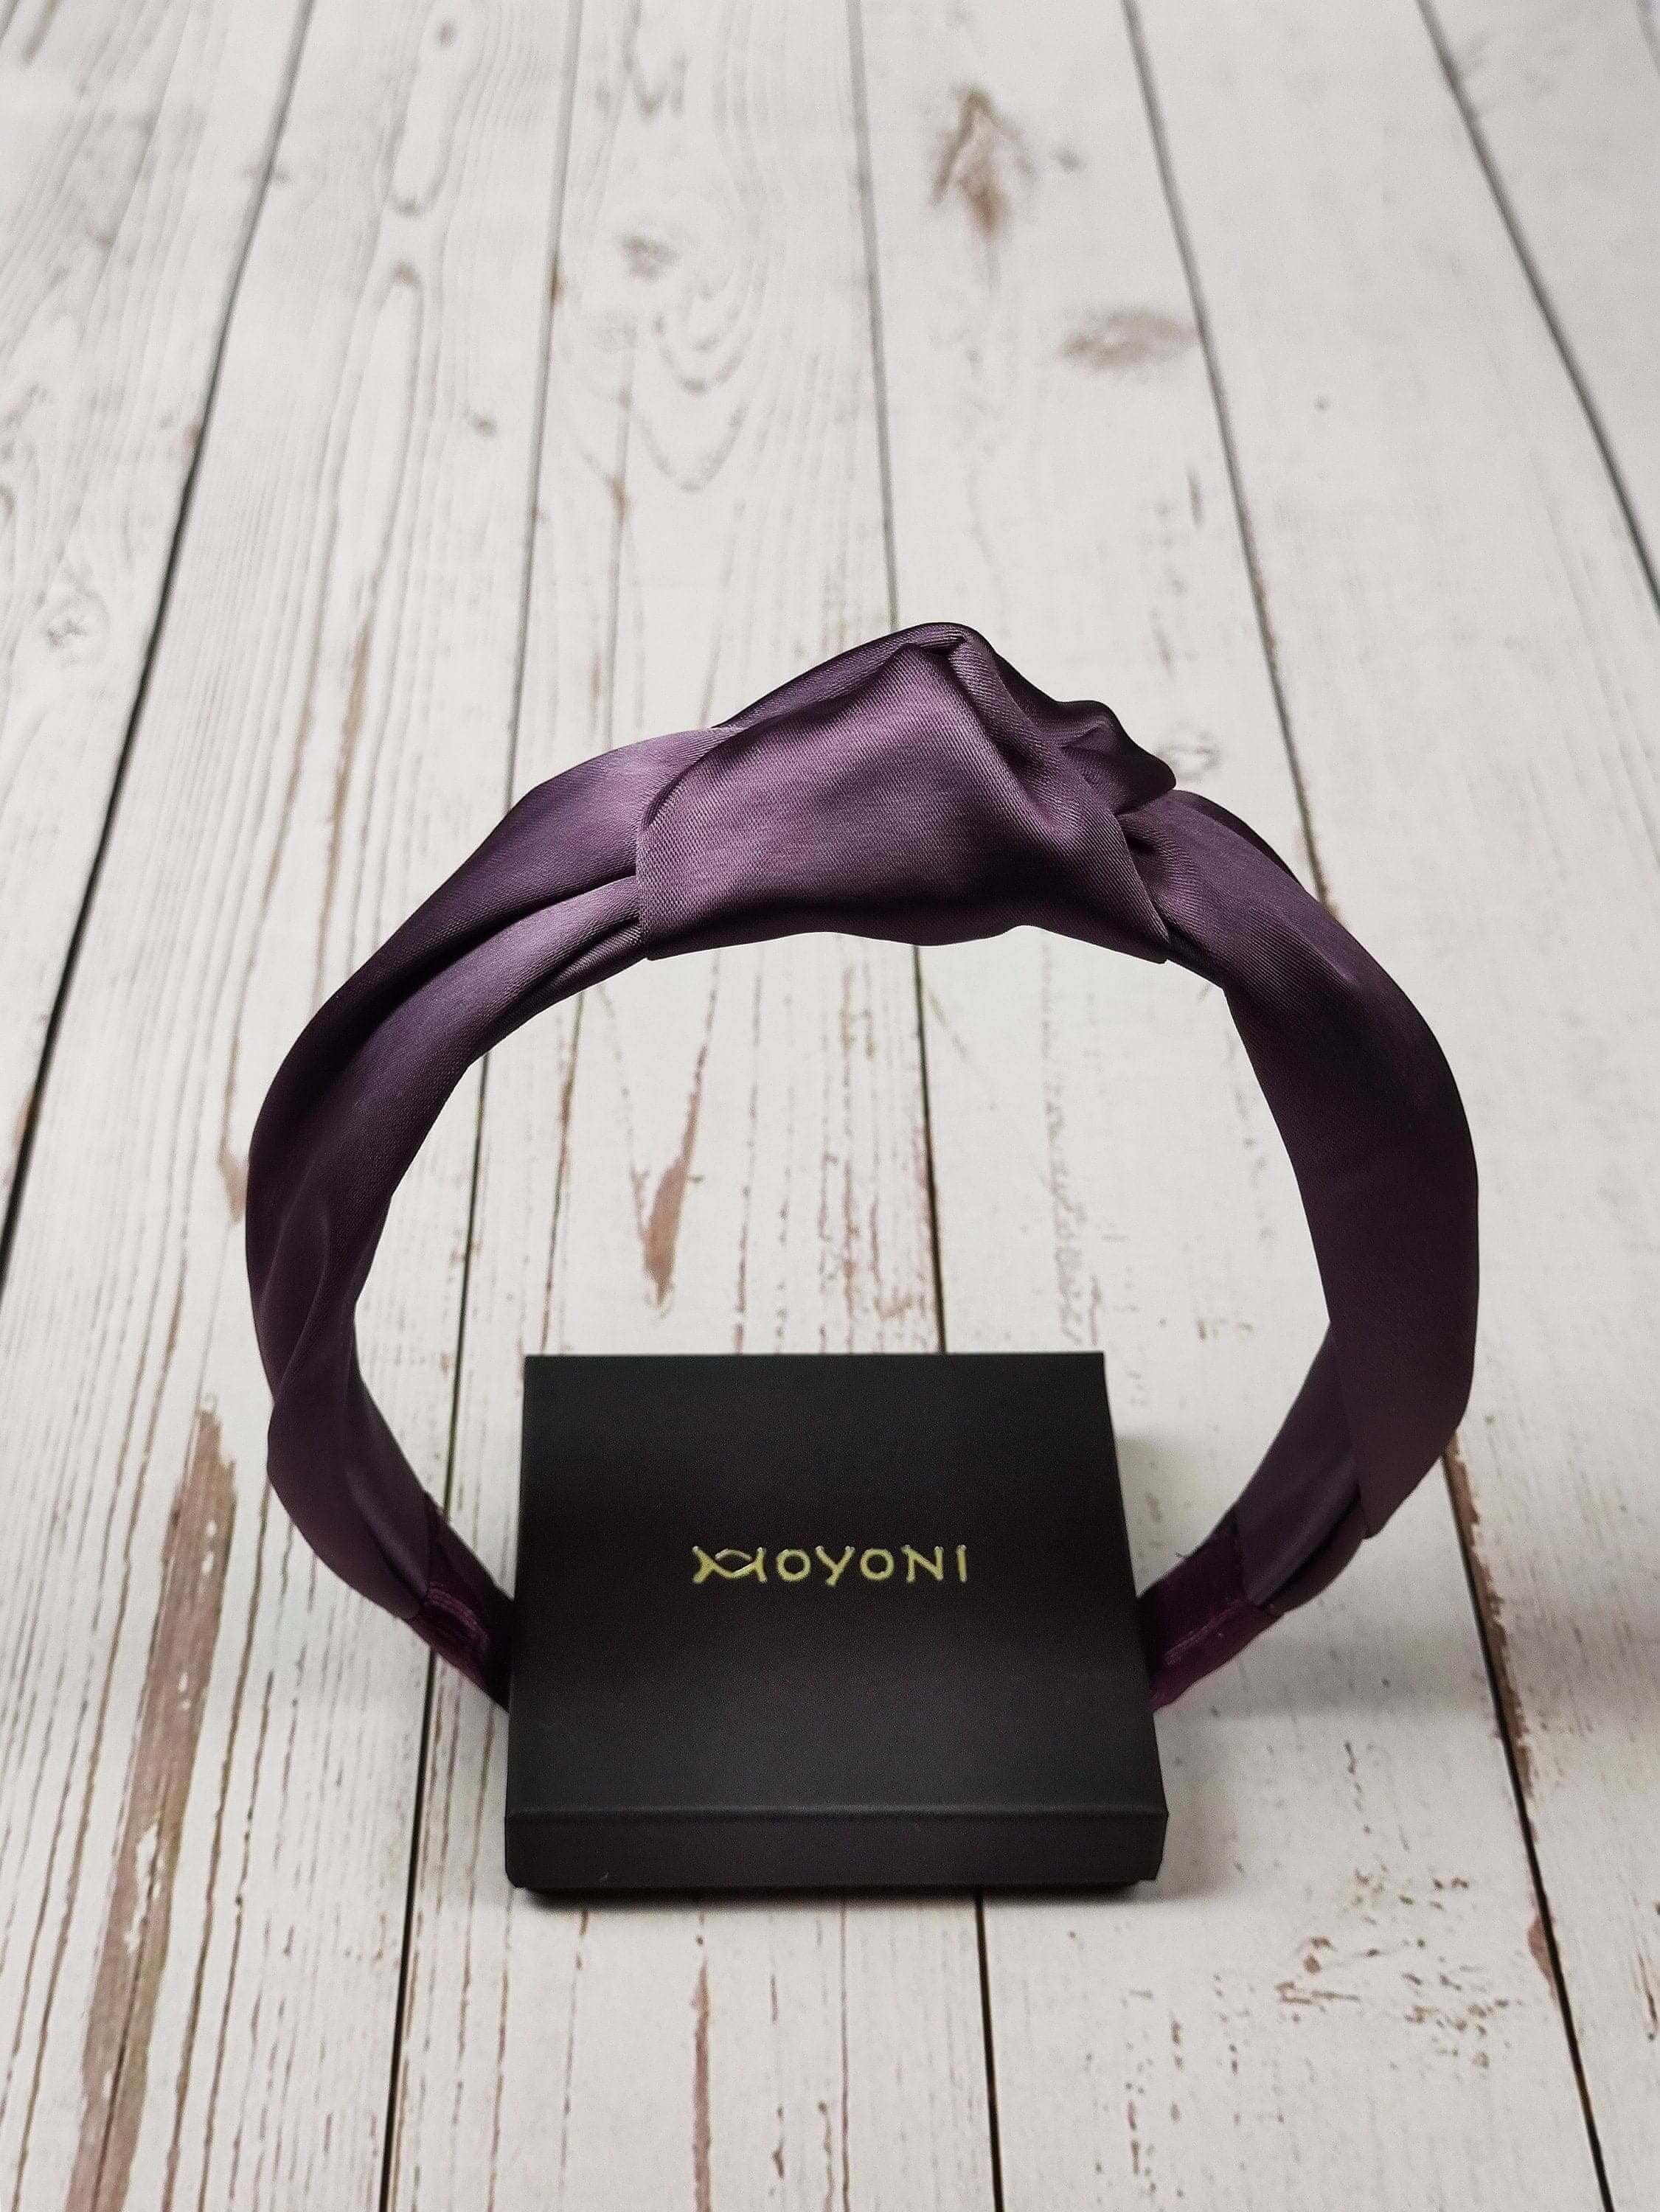 Stylish Lilac Satin Knotted Headband - Light Purple Women's Fashion Hair Accessory for Special Occasions available at Moyoni Design